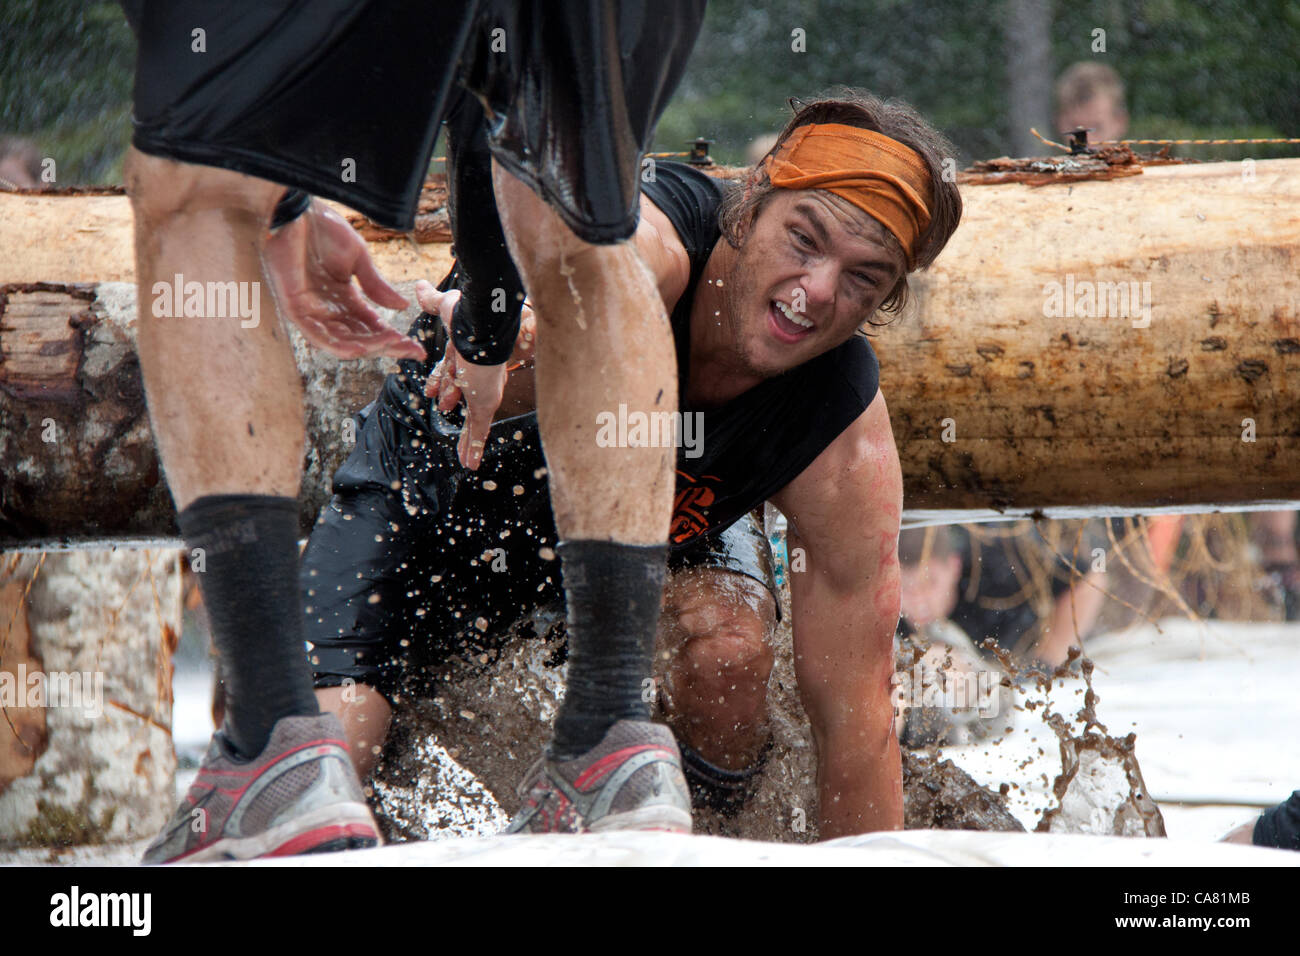 June 23, 2012. Participants compete in the Tough Mudder event, known as the premier obstacle course series in the world, at the Whistler Olympic Park, Whistler, Canada Stock Photo